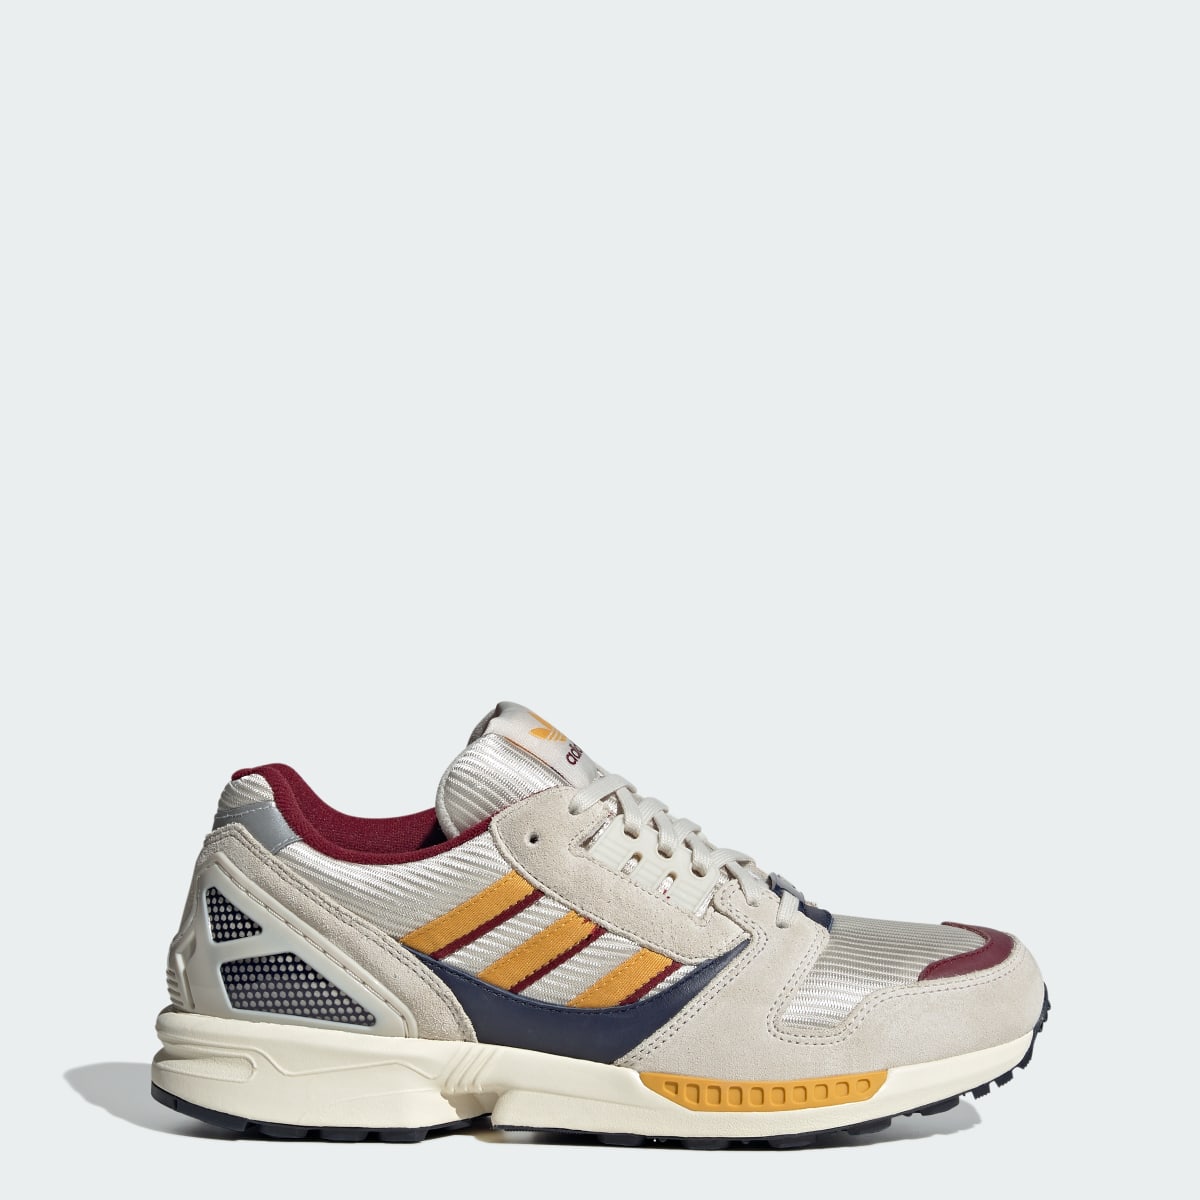 Adidas ZX 8000 Shoes - IE0550